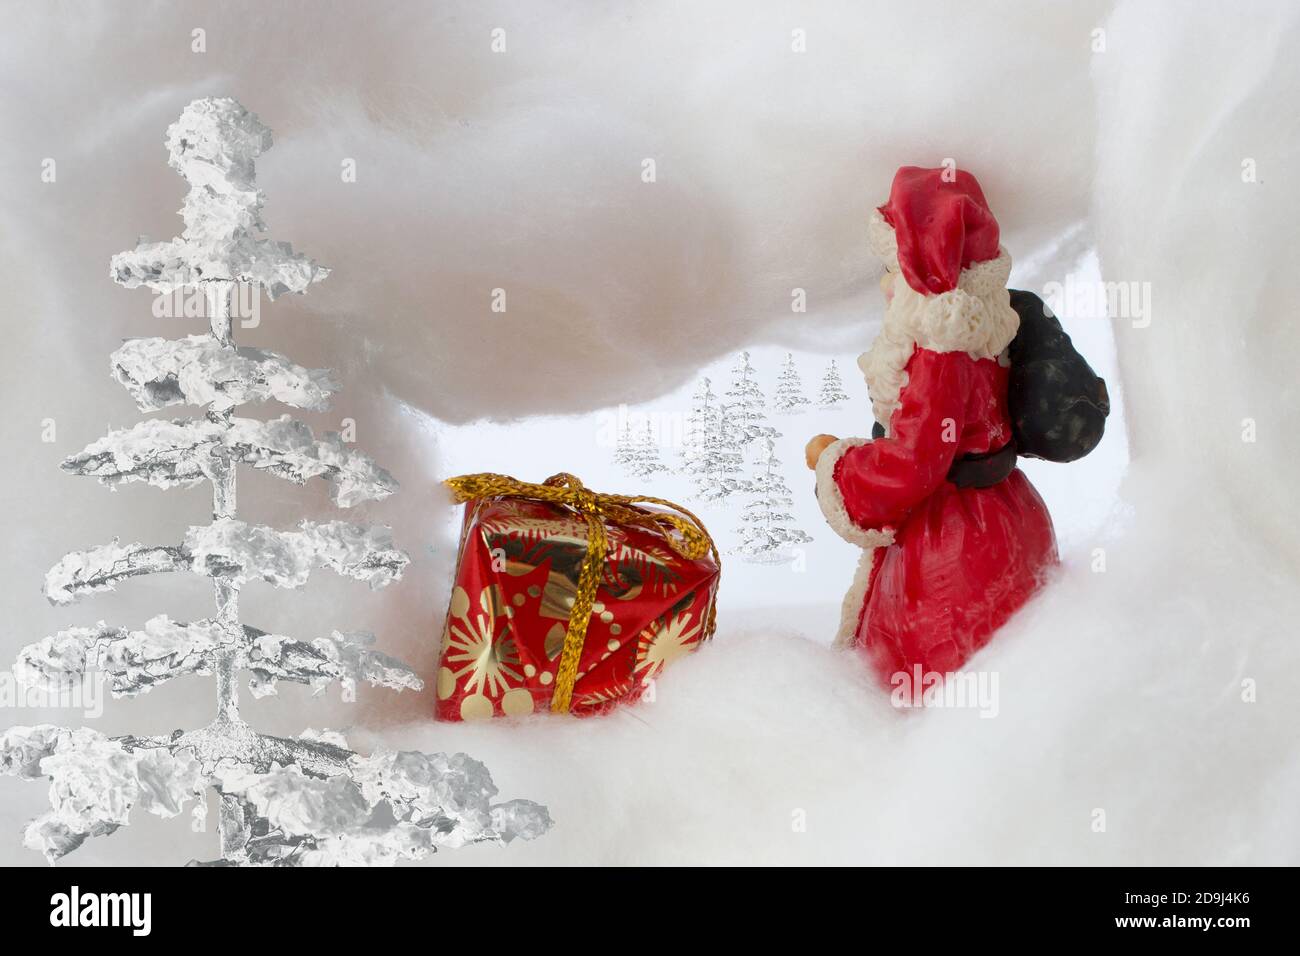 Santa claus in snowstorm with sack and gift. Trees are visible in the background. Stock Photo